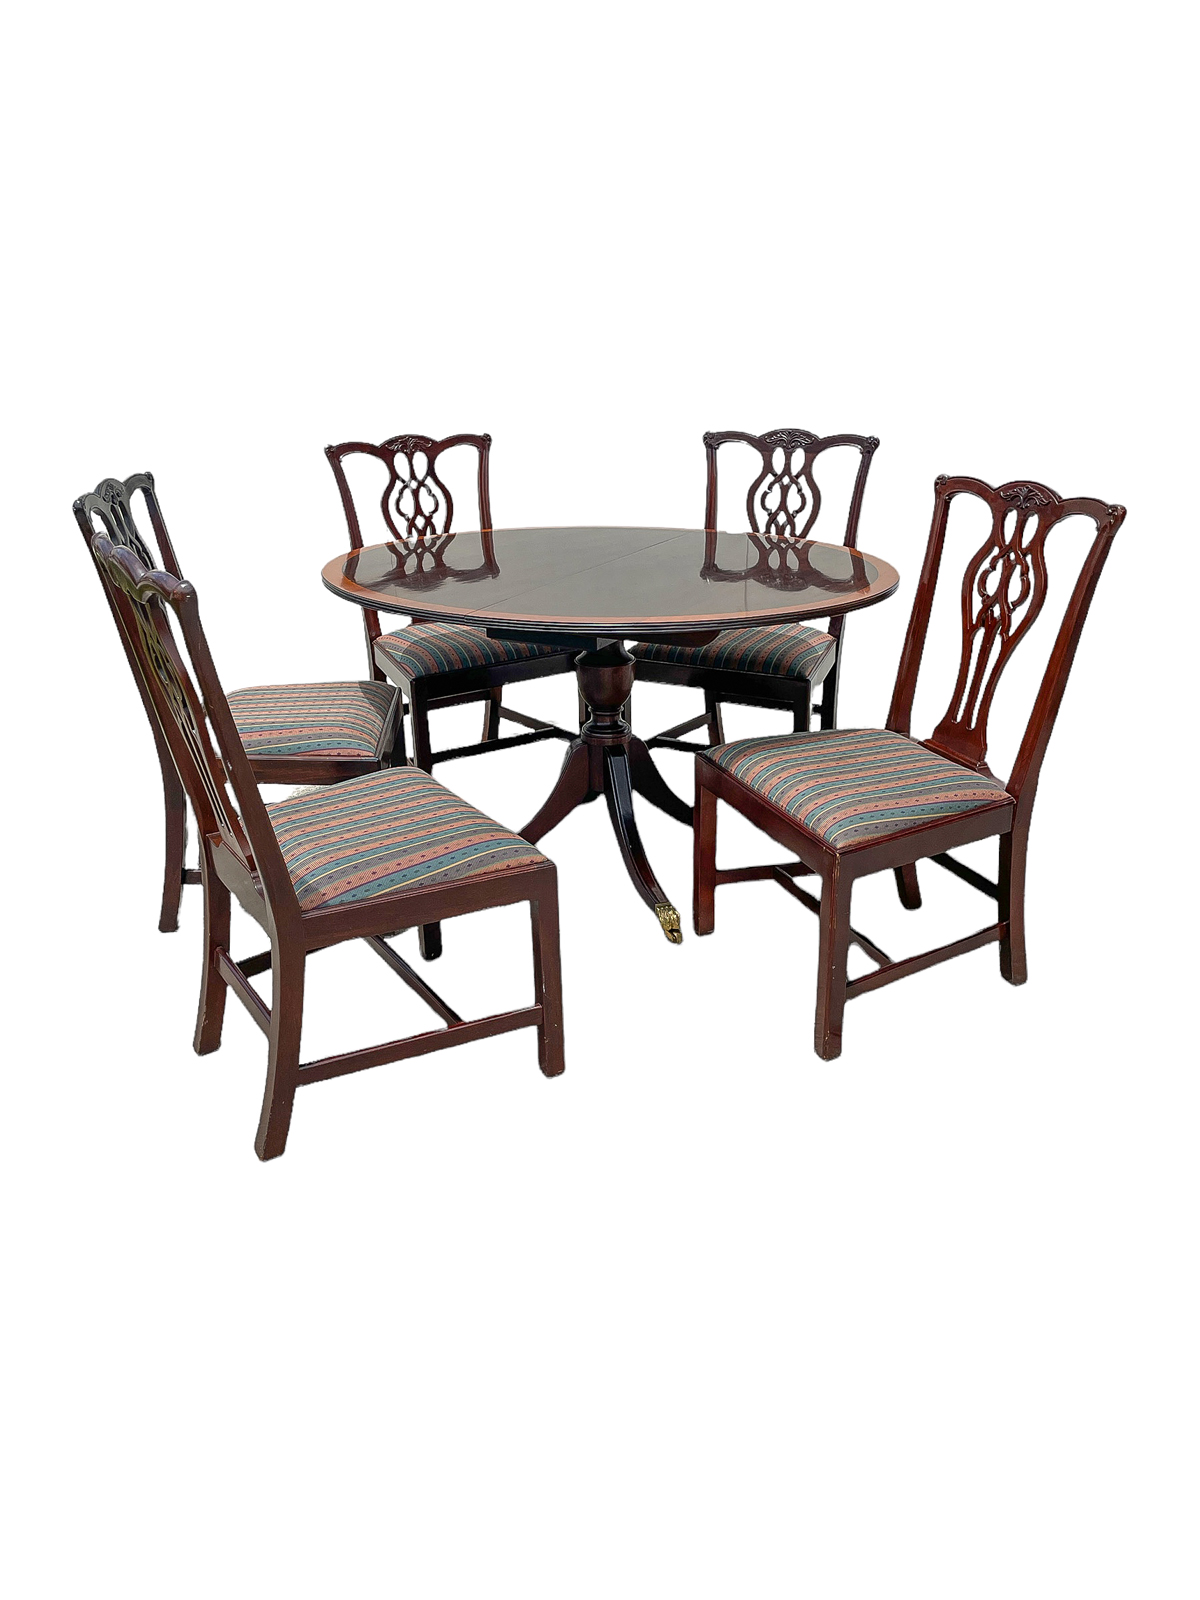 STICKLEY BANDED MAHOGANY DINING 36a1c8